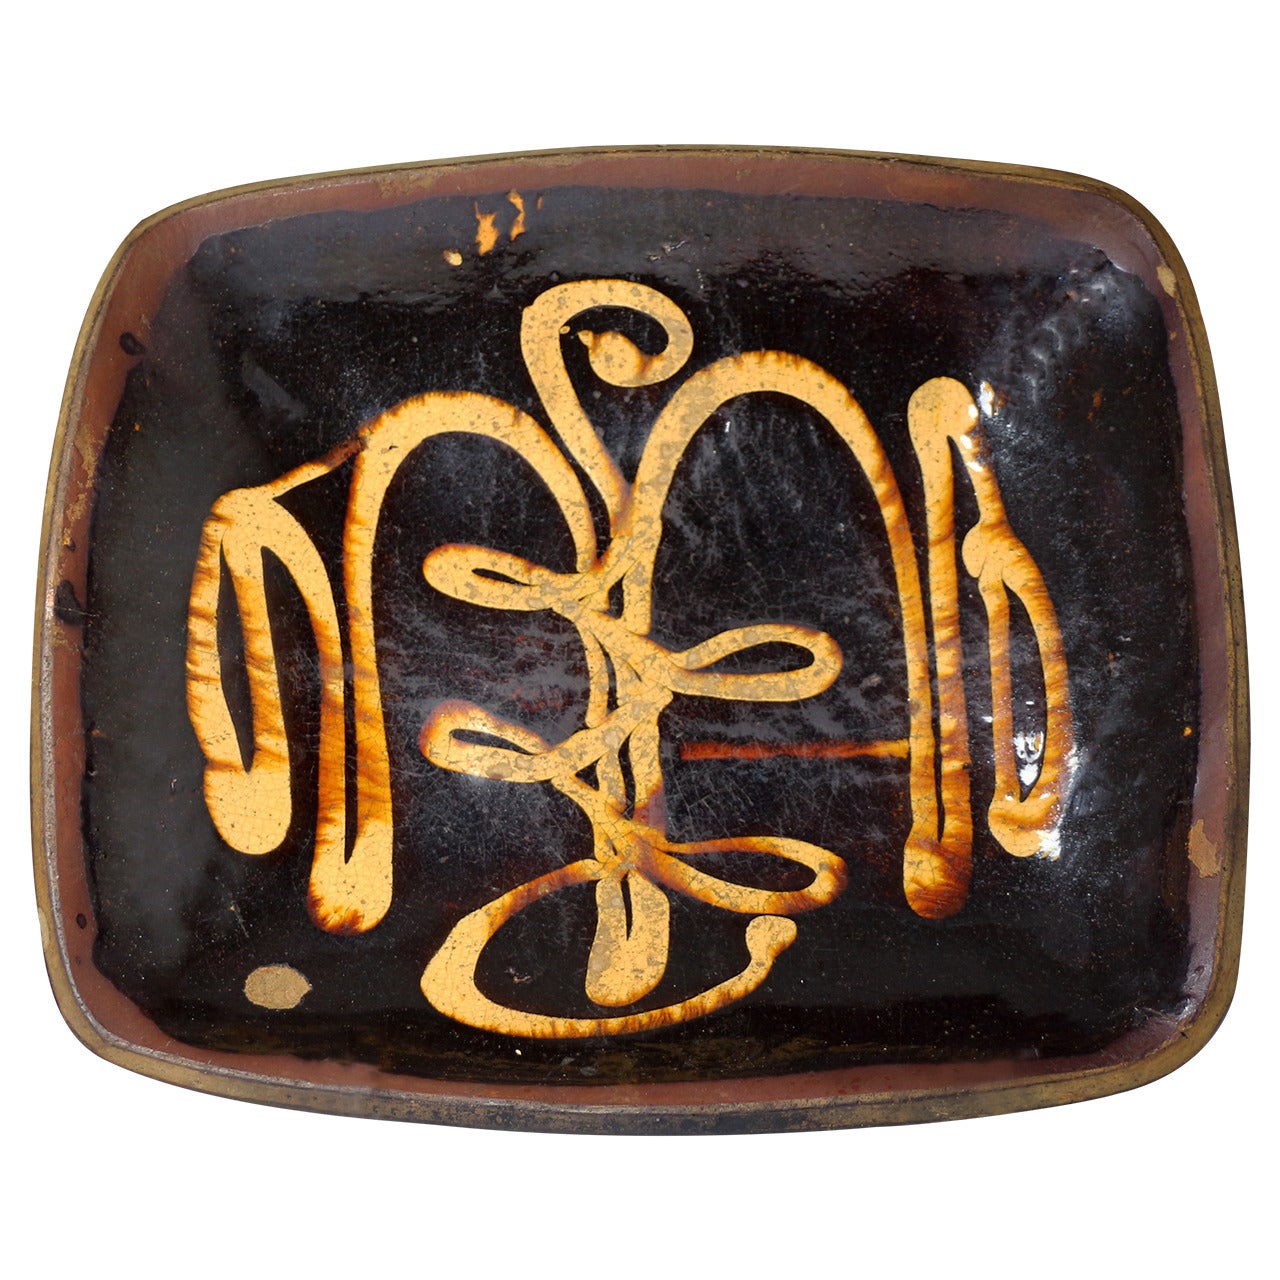 Early English Pottery Slipware Loaf Dish, 18th Century Probably Staffordshire